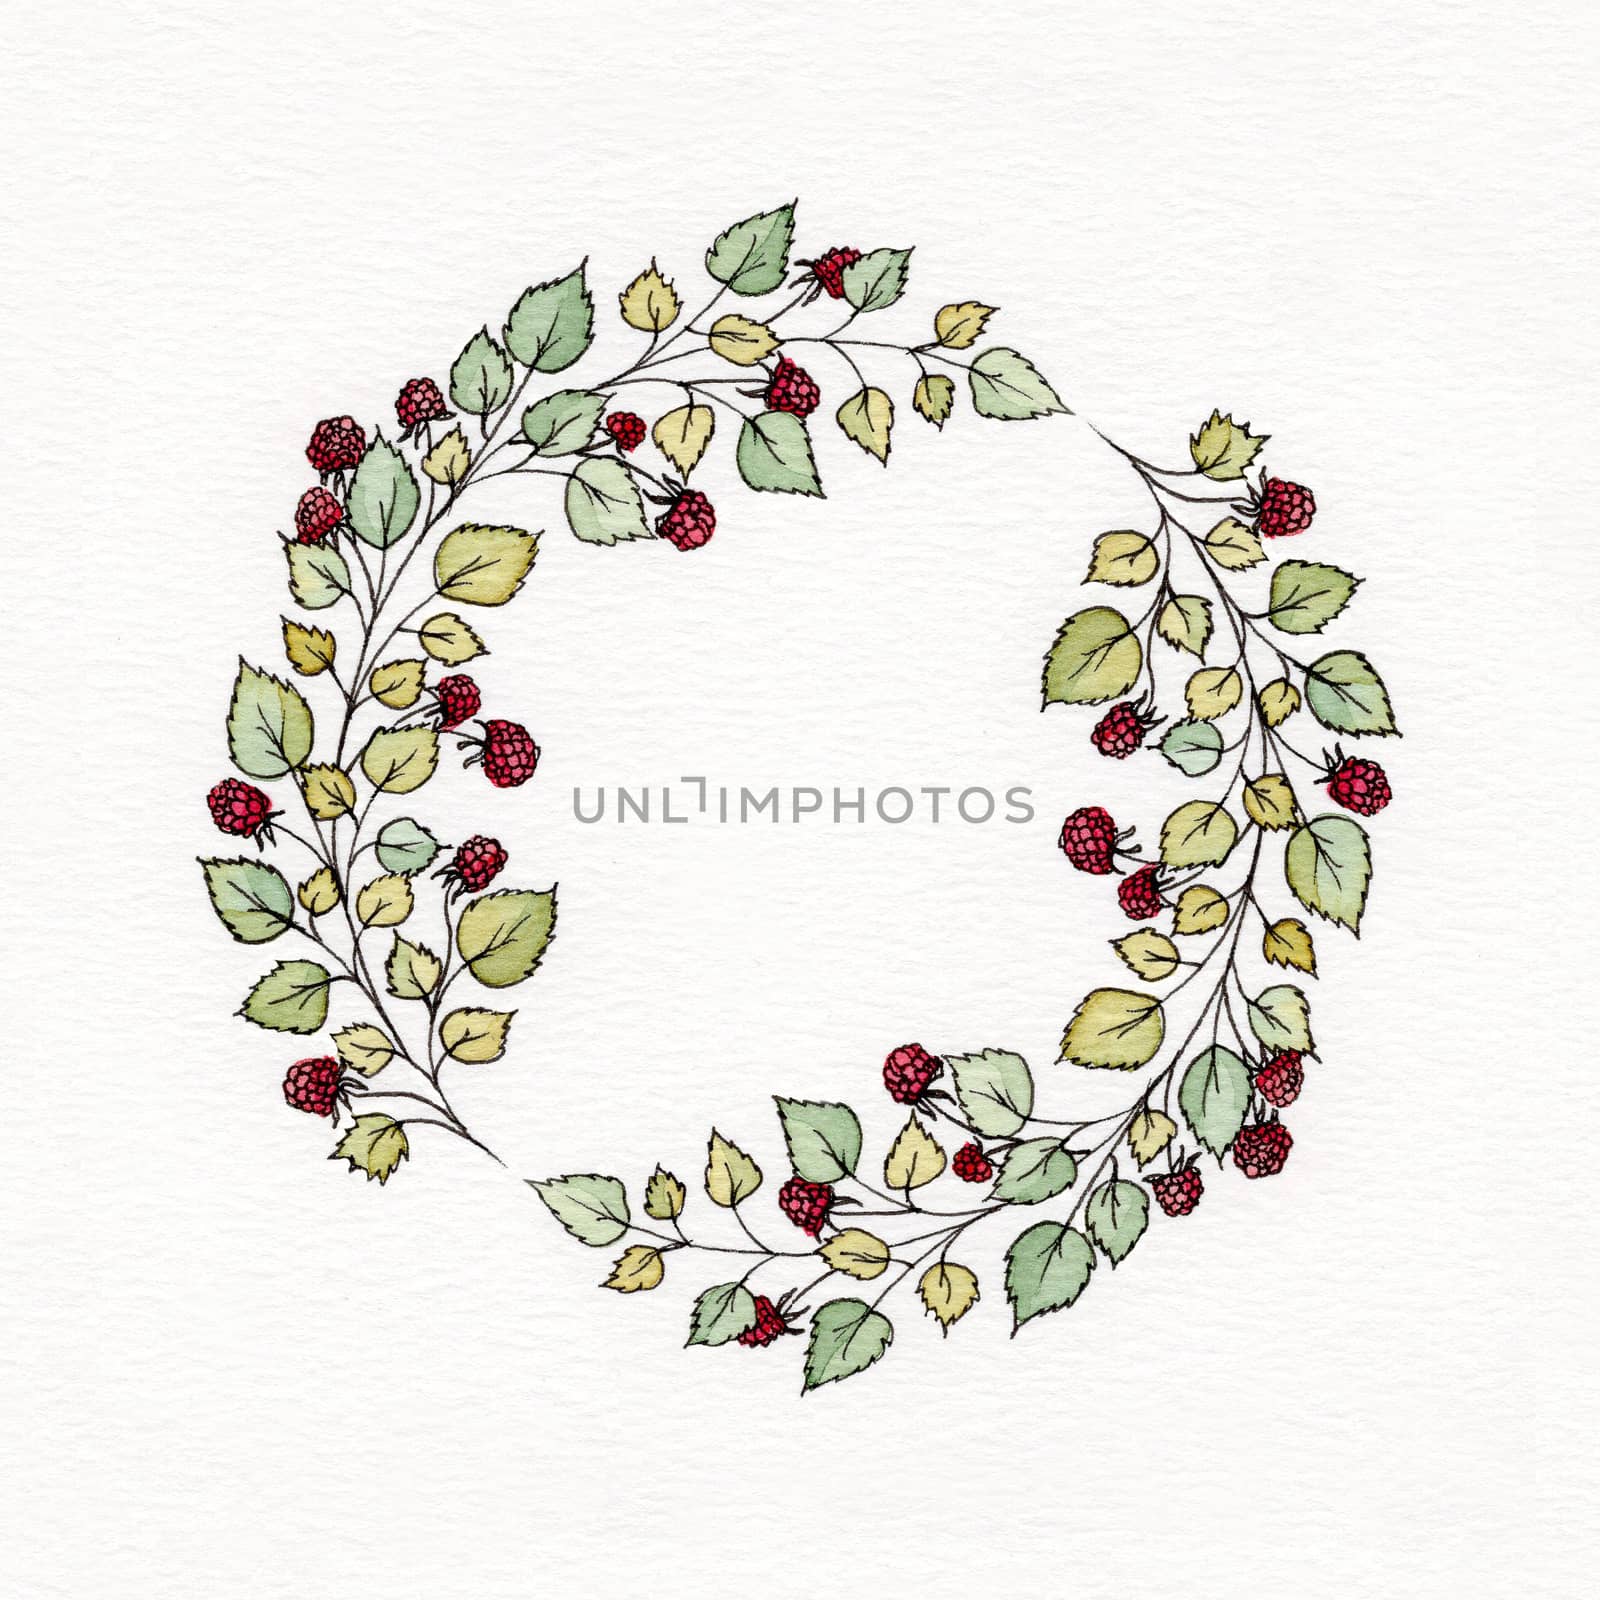 Watercolor wreath with leaves and berries of raspberries by JaneMaier